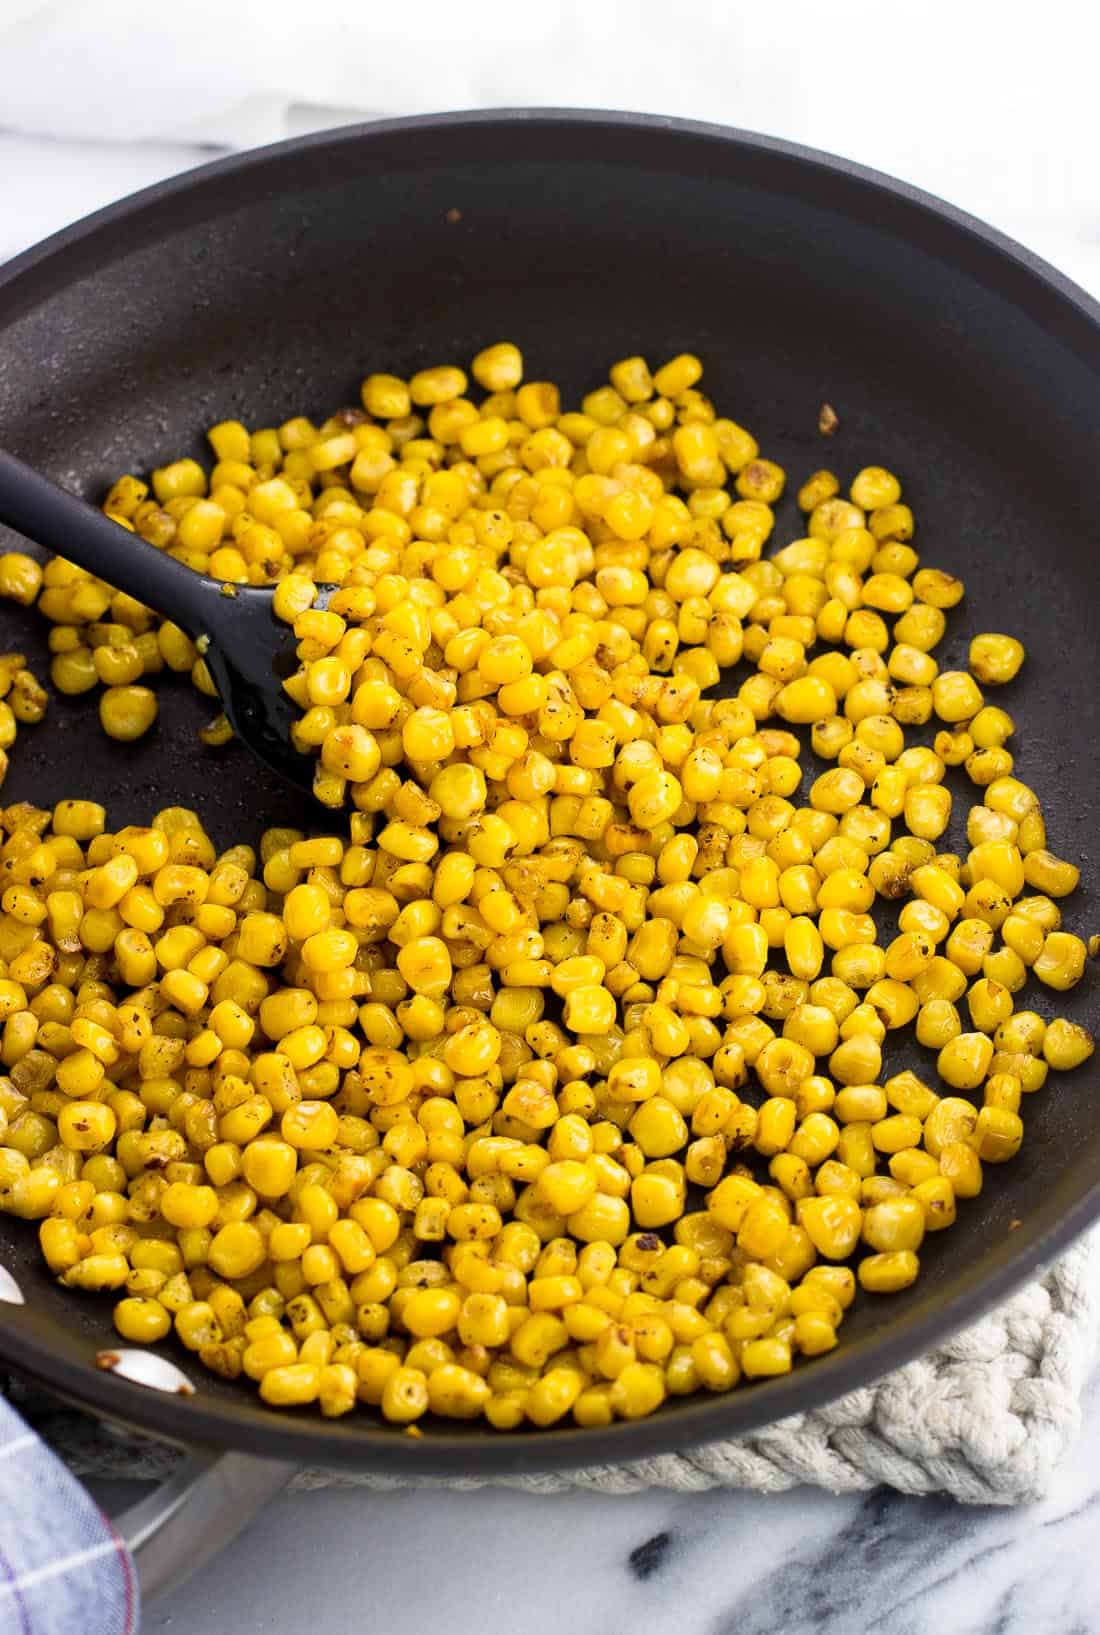 Roasted corn kernels in a skillet with a spatula.